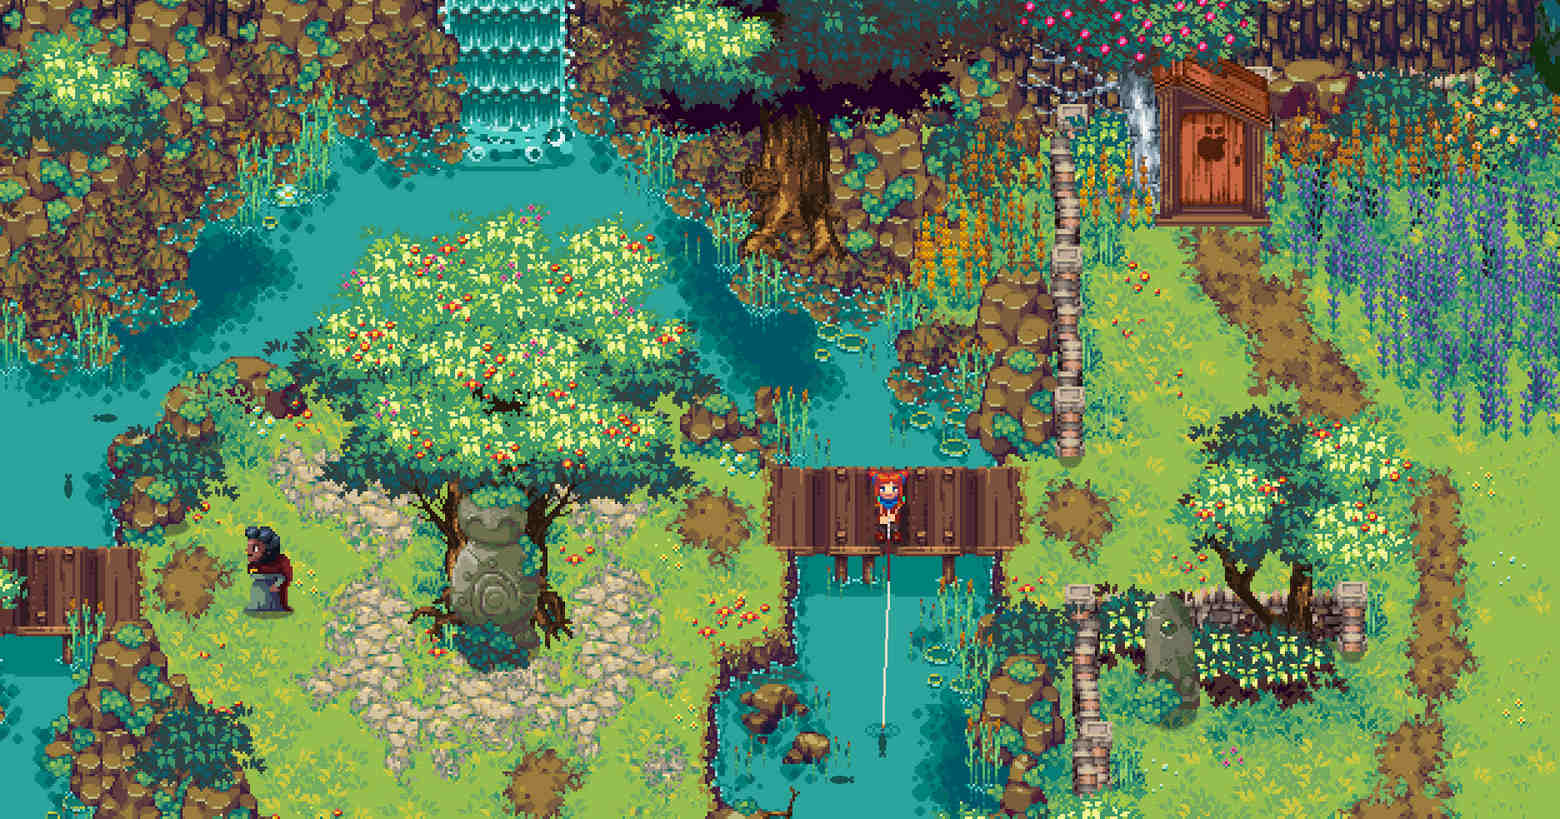 In this 2D pixel sandbox RPG from the Fable developers, you can also fish, as this screenshot shows: We catch sight of a female character with red braids in an isometric perspective in the middle of a blooming forest landscape. The character is standing on a horizontal wooden bridge and has thrown out his fishing rod toward the lower edge of the picture. To her left is a small forest island with a large apple tree in the middle. Turquoise water flows around this small isle. To the left, another horizontal bridge goes out to the left edge of the picture. At the top of the image, a large tree with dark green leaves is shown in the crop, as well as many brown rock-like shapes. To the right of the bridge, we look at a green meadow with blue flowers at the upper right edge of the picture, next to which is a small wooden hut. A brown path leaves this hut and runs vertically downward out of the image. Kynseed has a release date and will come out on December 6, 2022, as announced on Twitter.